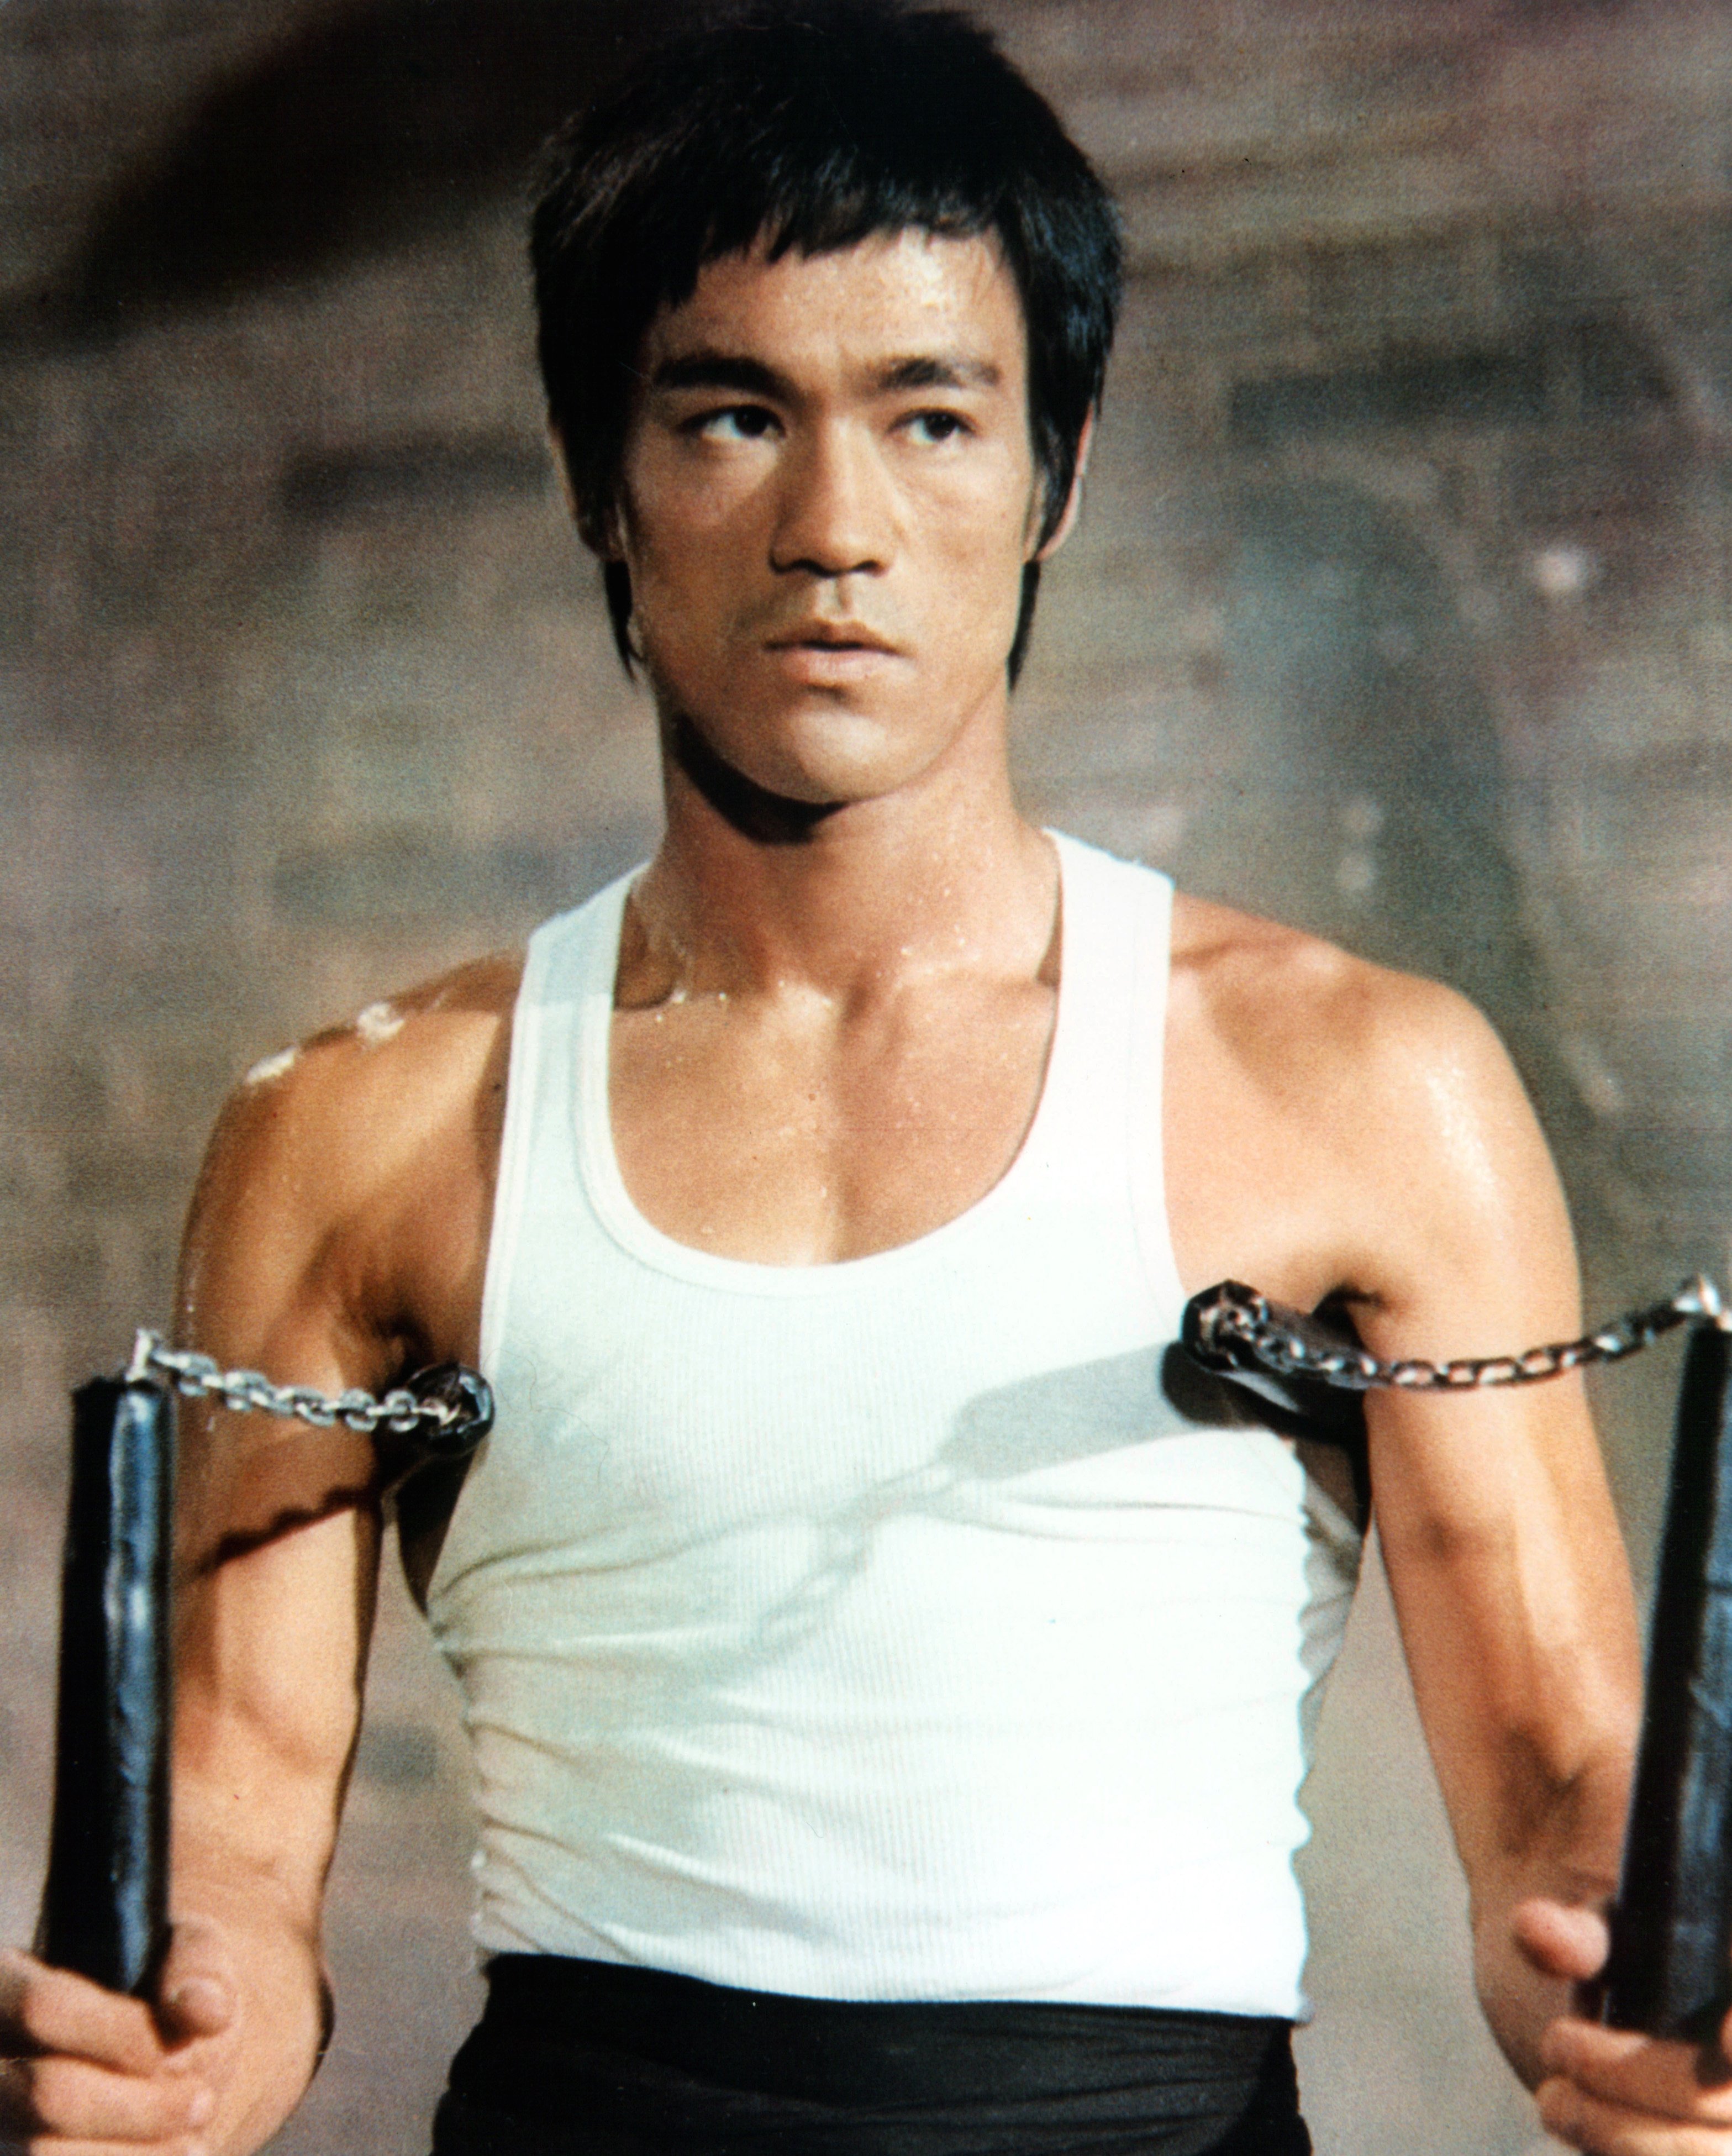 Bruce Lee poses for a portrait, circa 1972. | Source: Getty Images